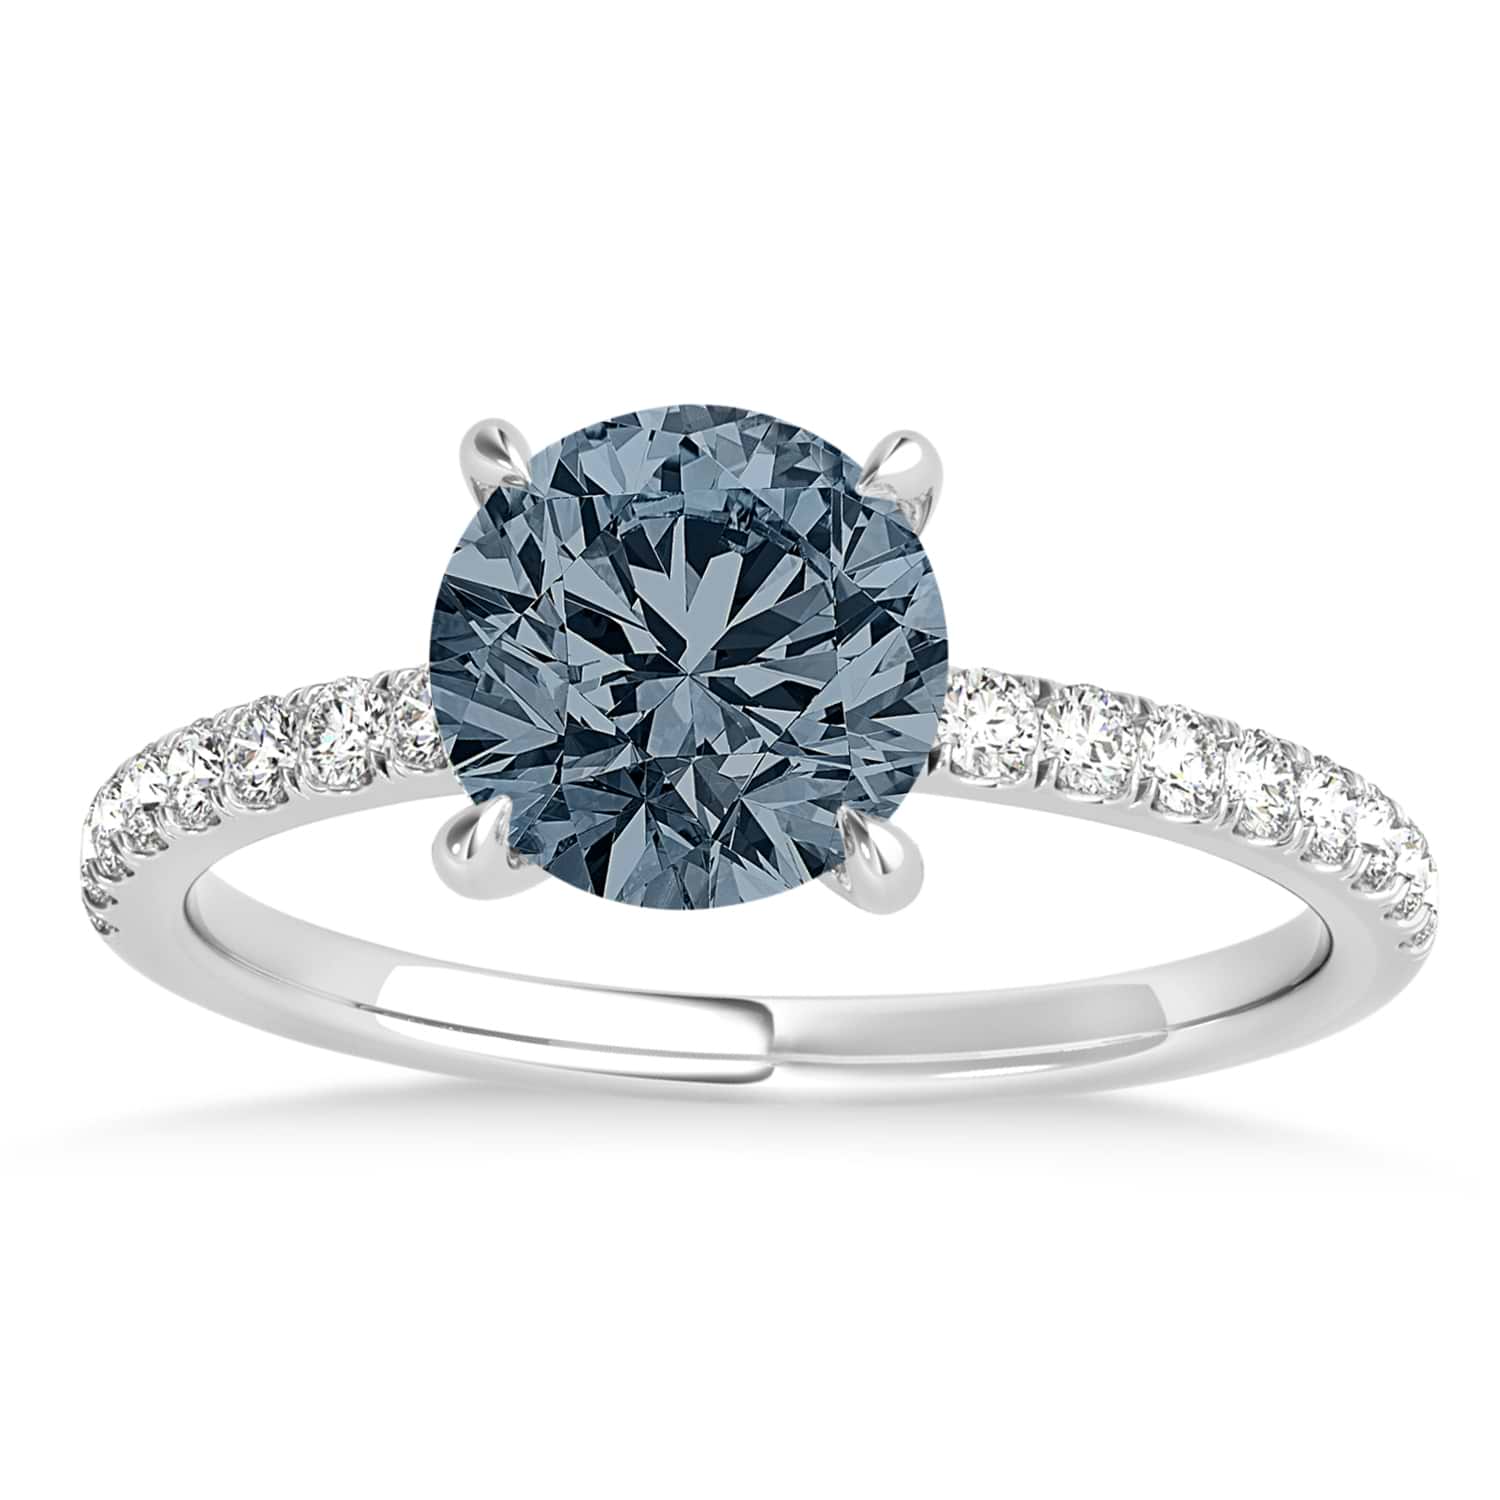 Round Gray Spinel & Diamond Single Row Hidden Halo Engagement Ring 14k White Gold (1.25ct)